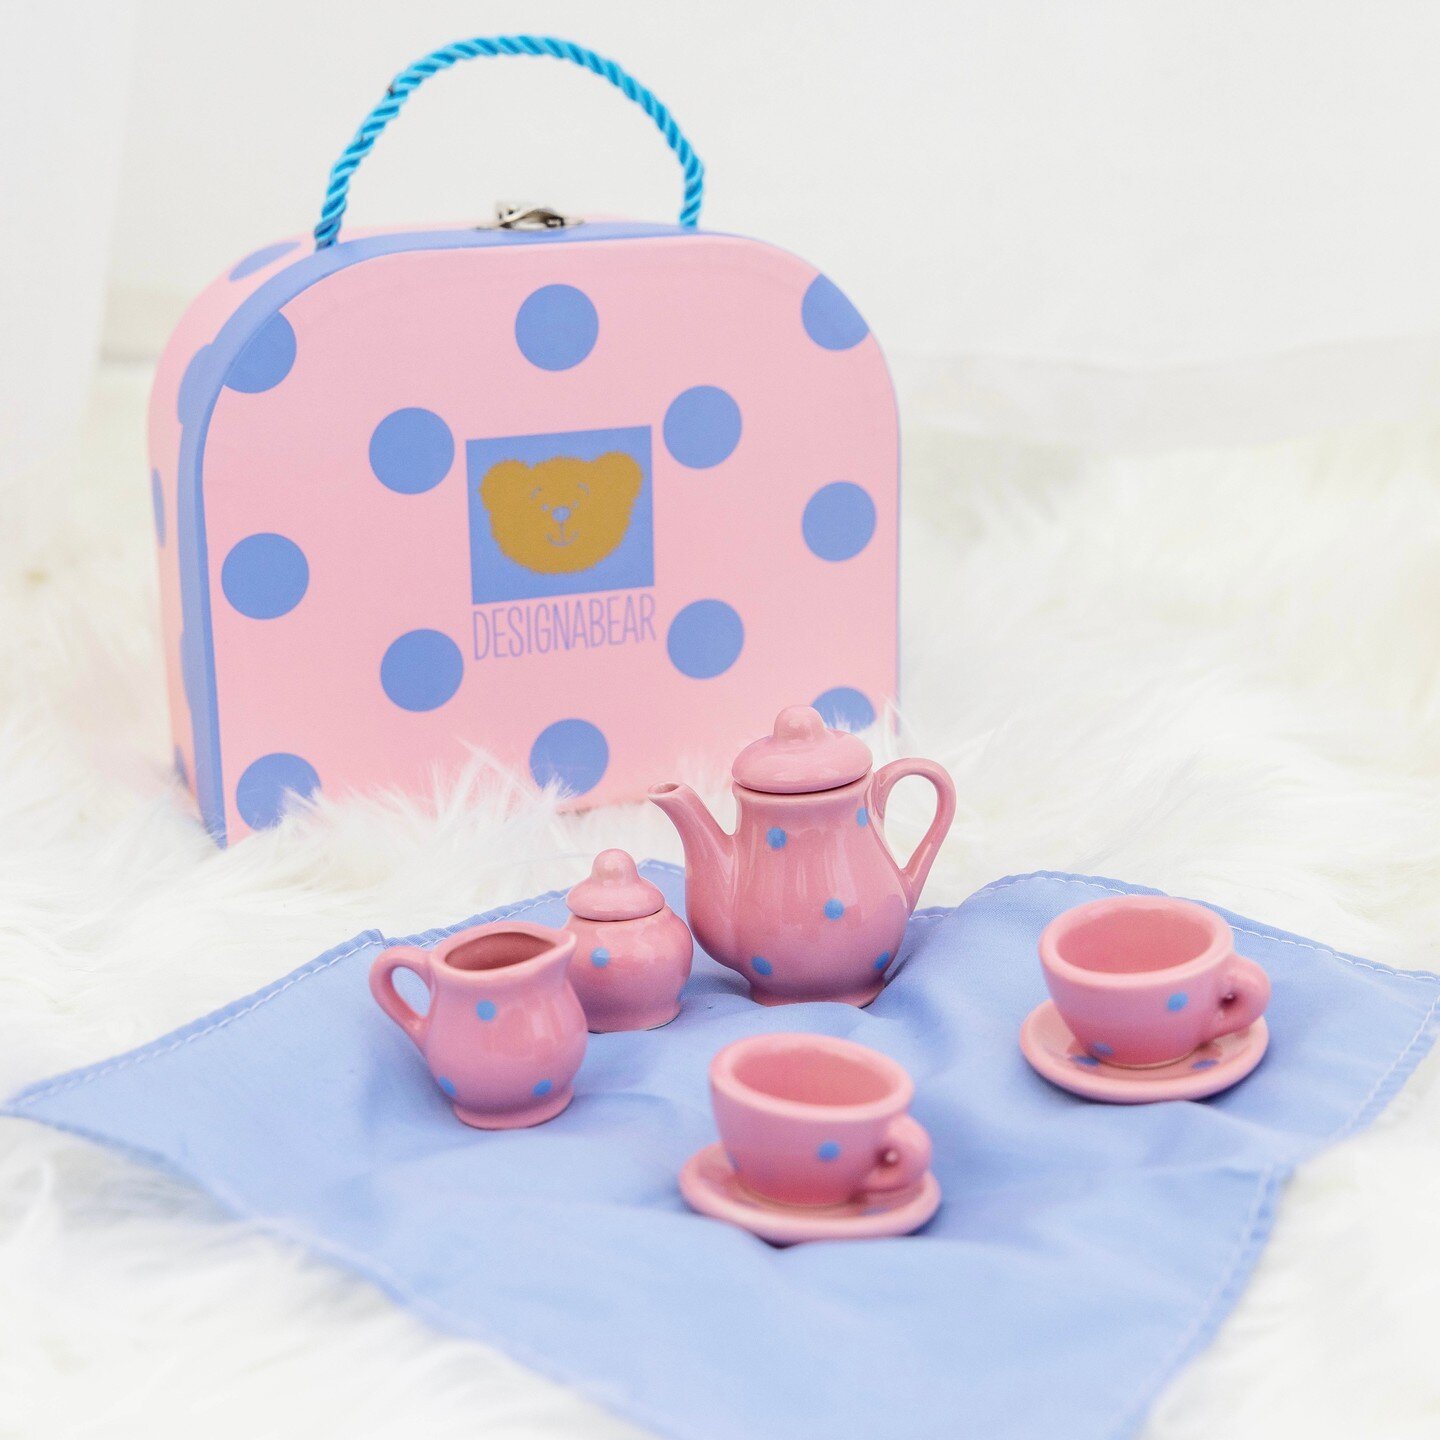 The Polka Dot Tea Set is a super fun way to introduce role playing to your little one. The possibilities are endless! Discover the DesignaBear range over on Argos.co.uk 🎄✨

#designabear #plushie #plushiesofinstagram #plush #teddies #teddy #softtoys 